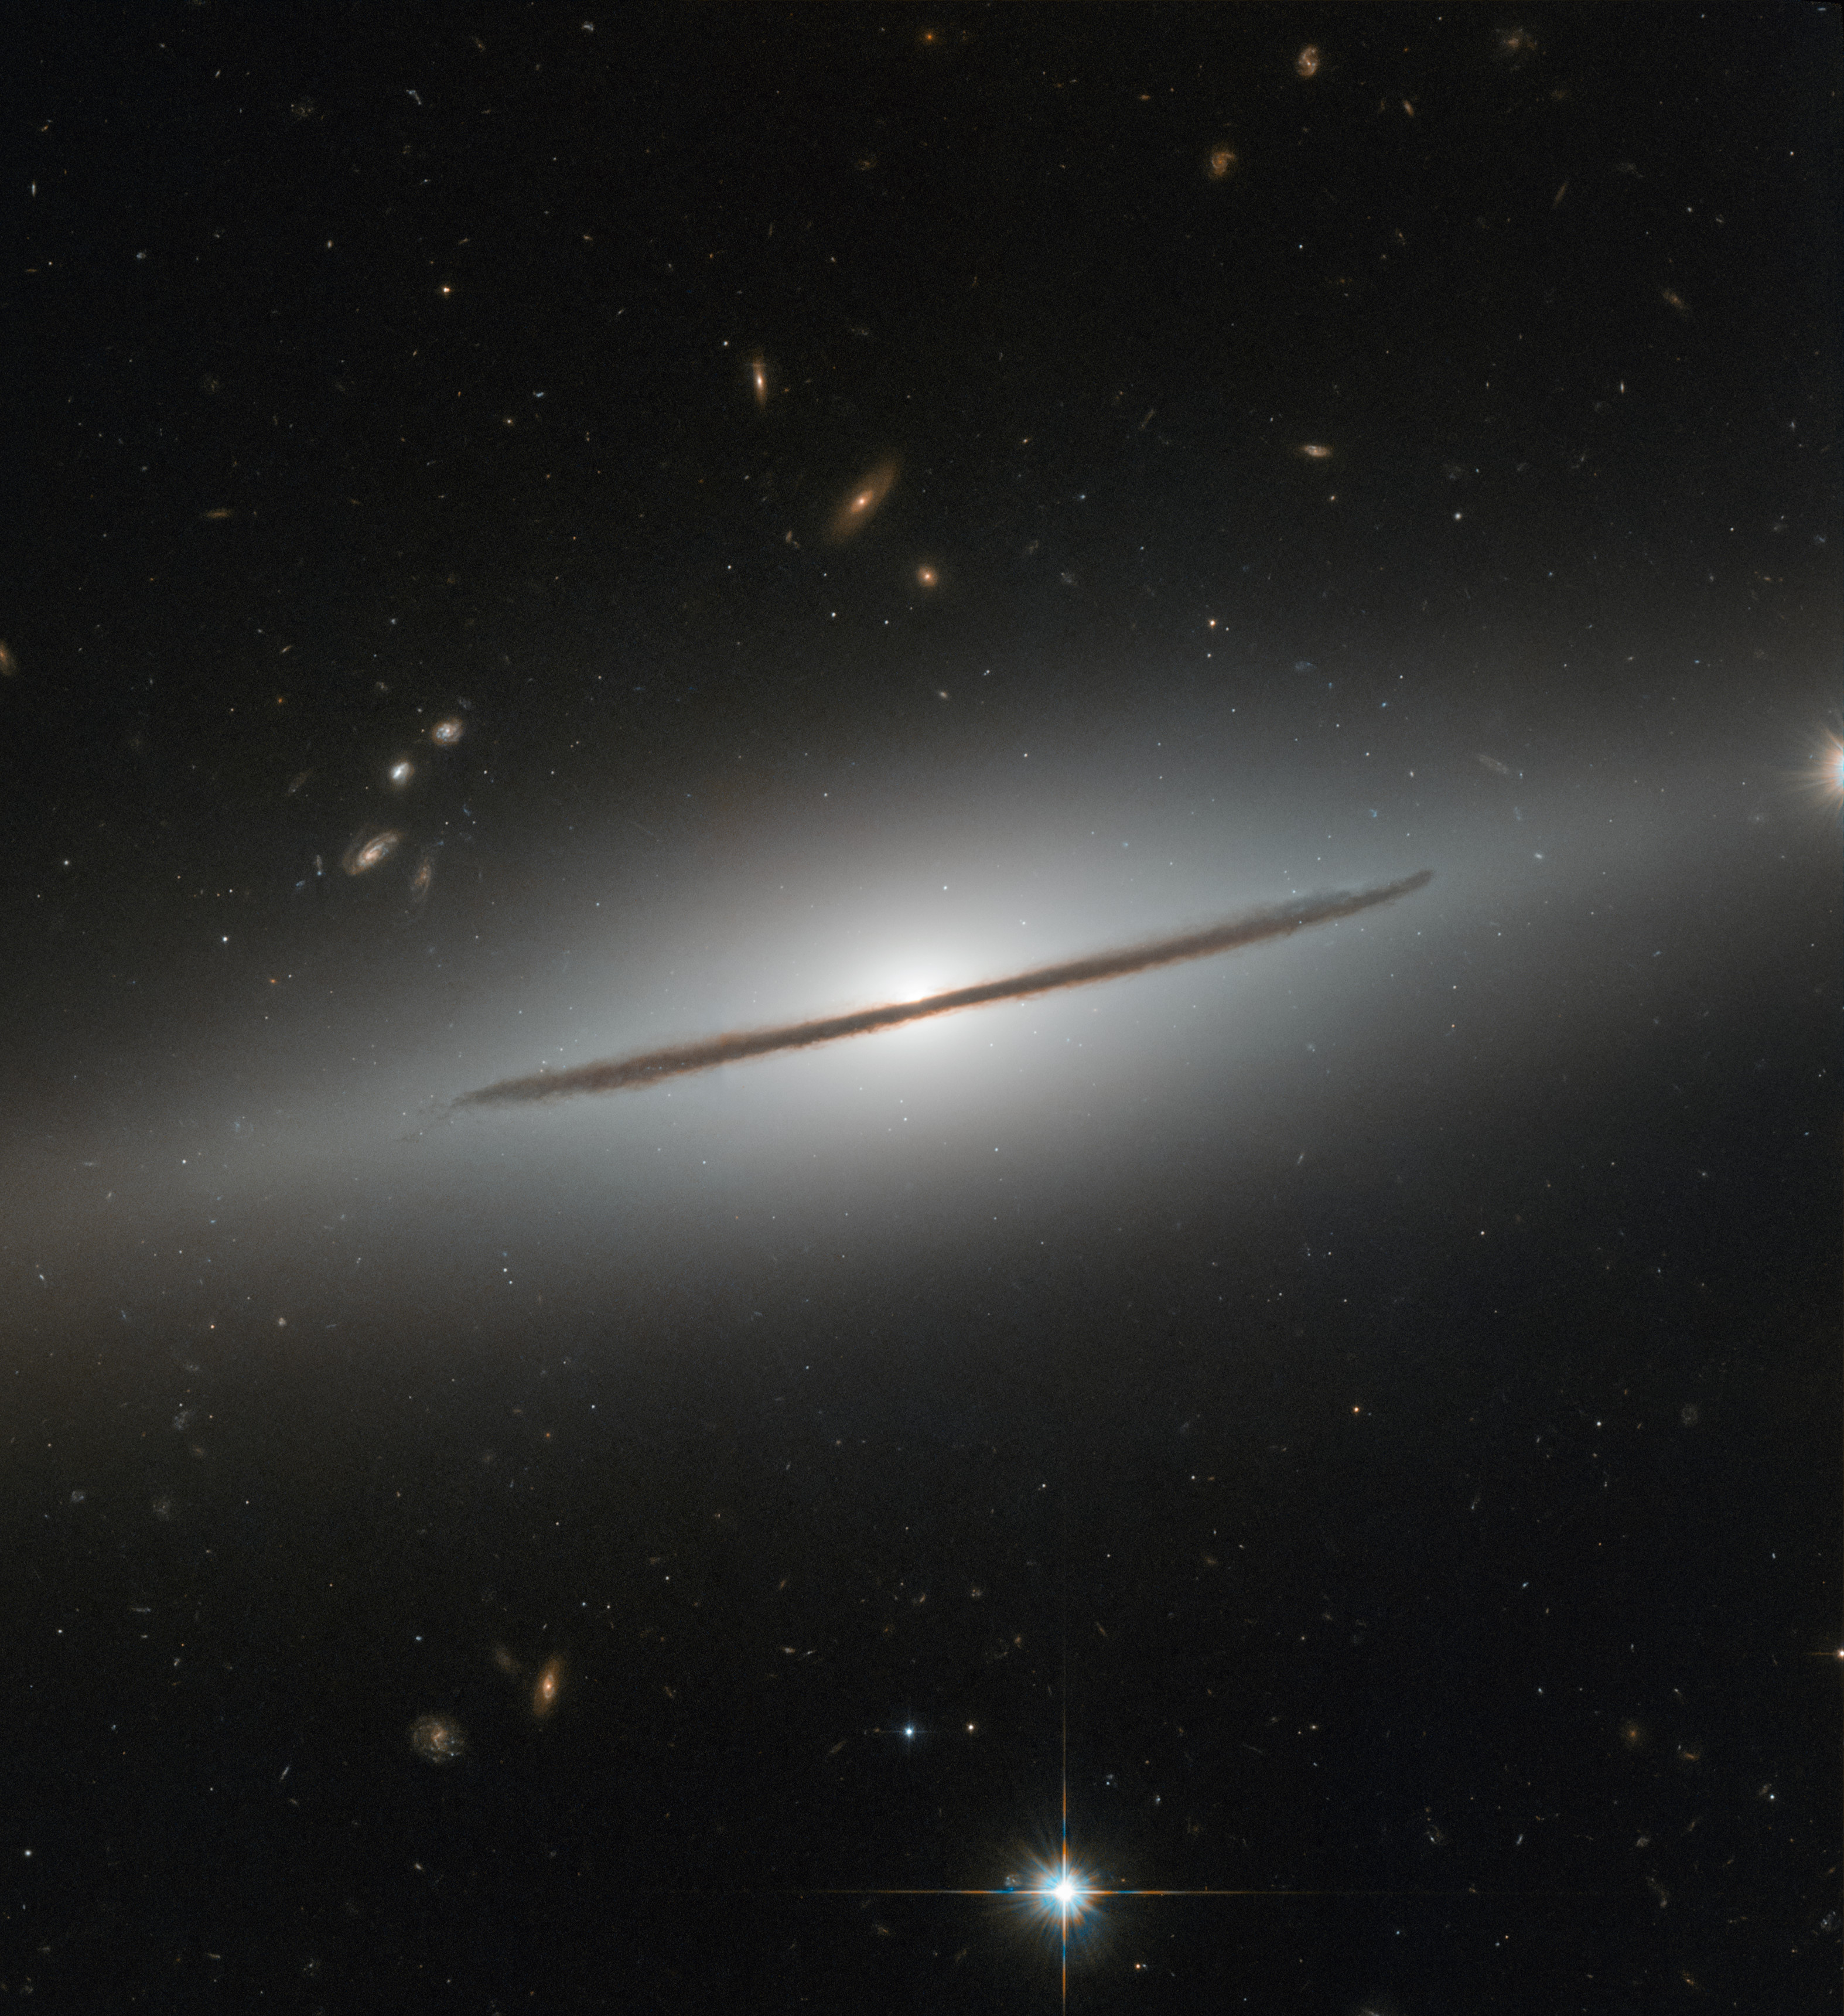 Hubble Catches a Spiral Galaxy in Disguise | NASA